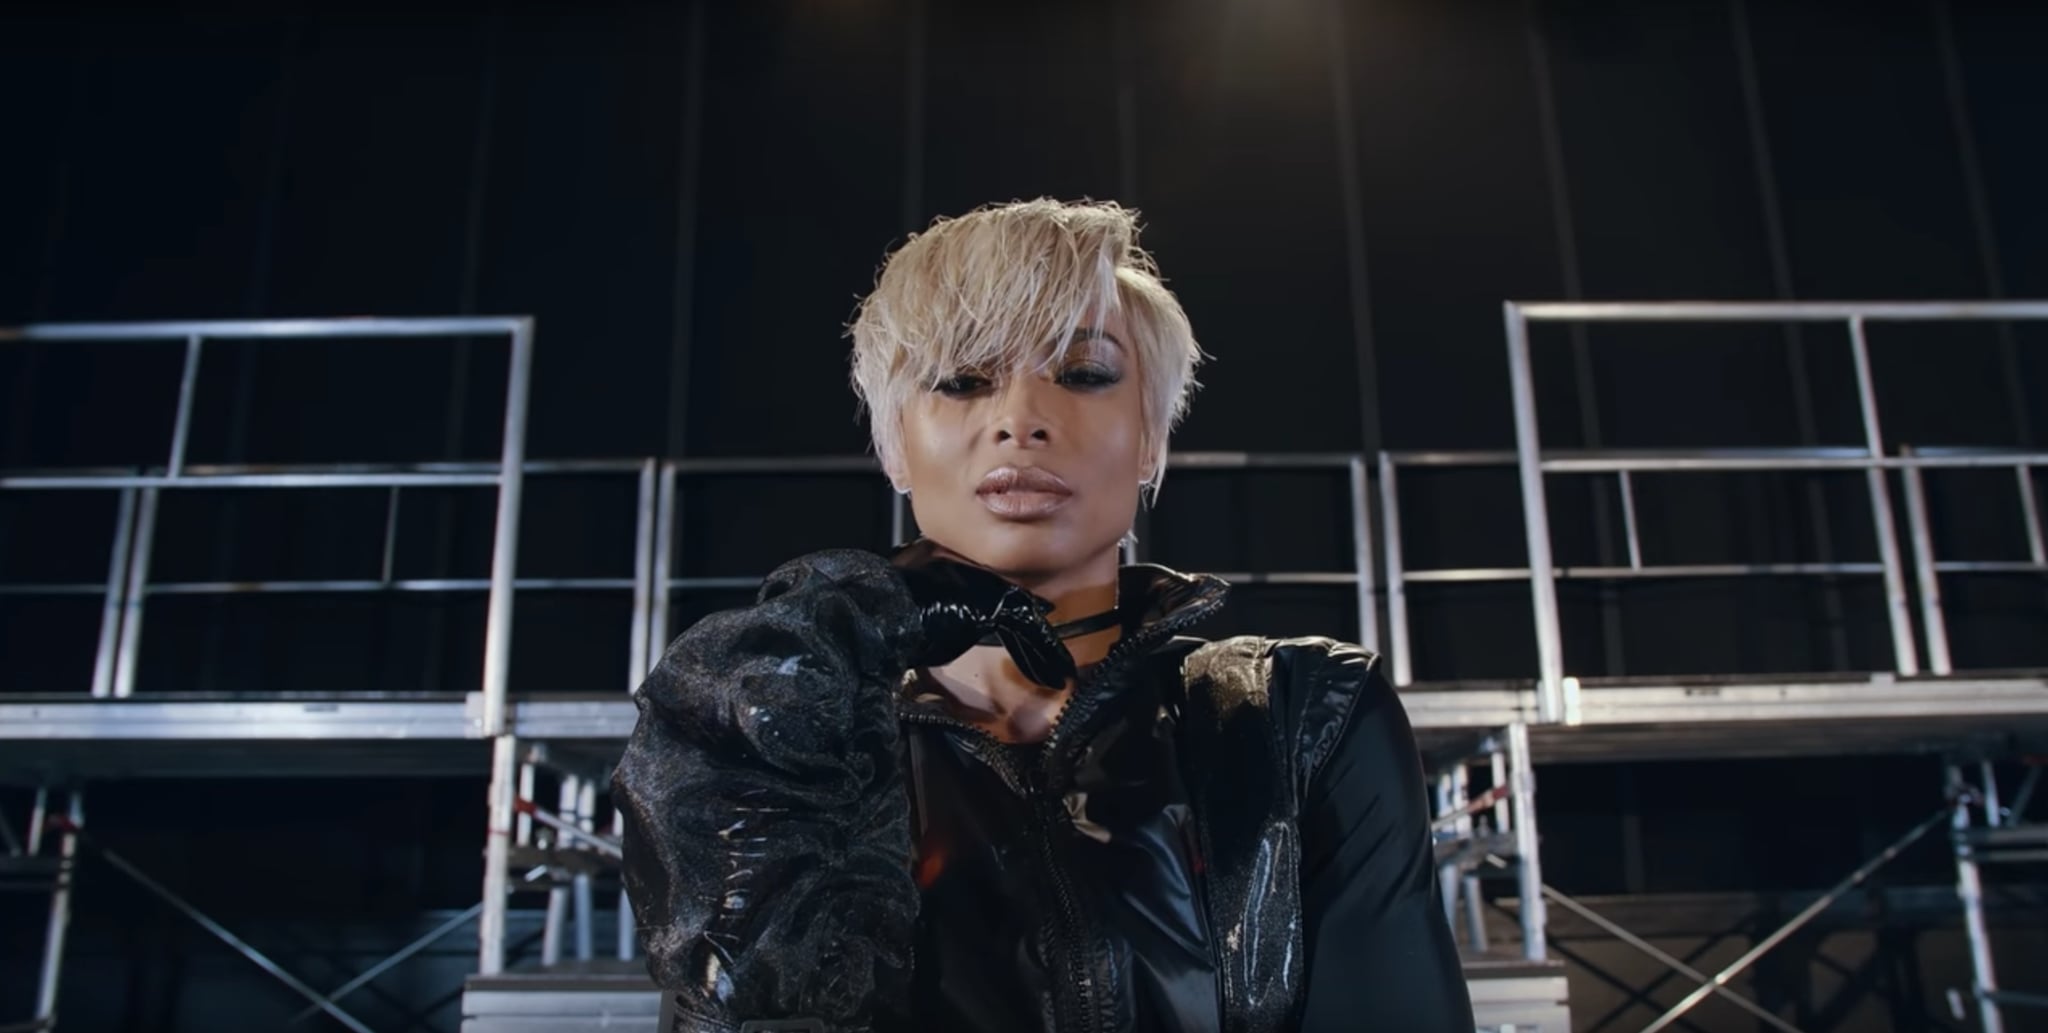 Ciara S Short Blond Hair In The Set Music Video We Simply Must